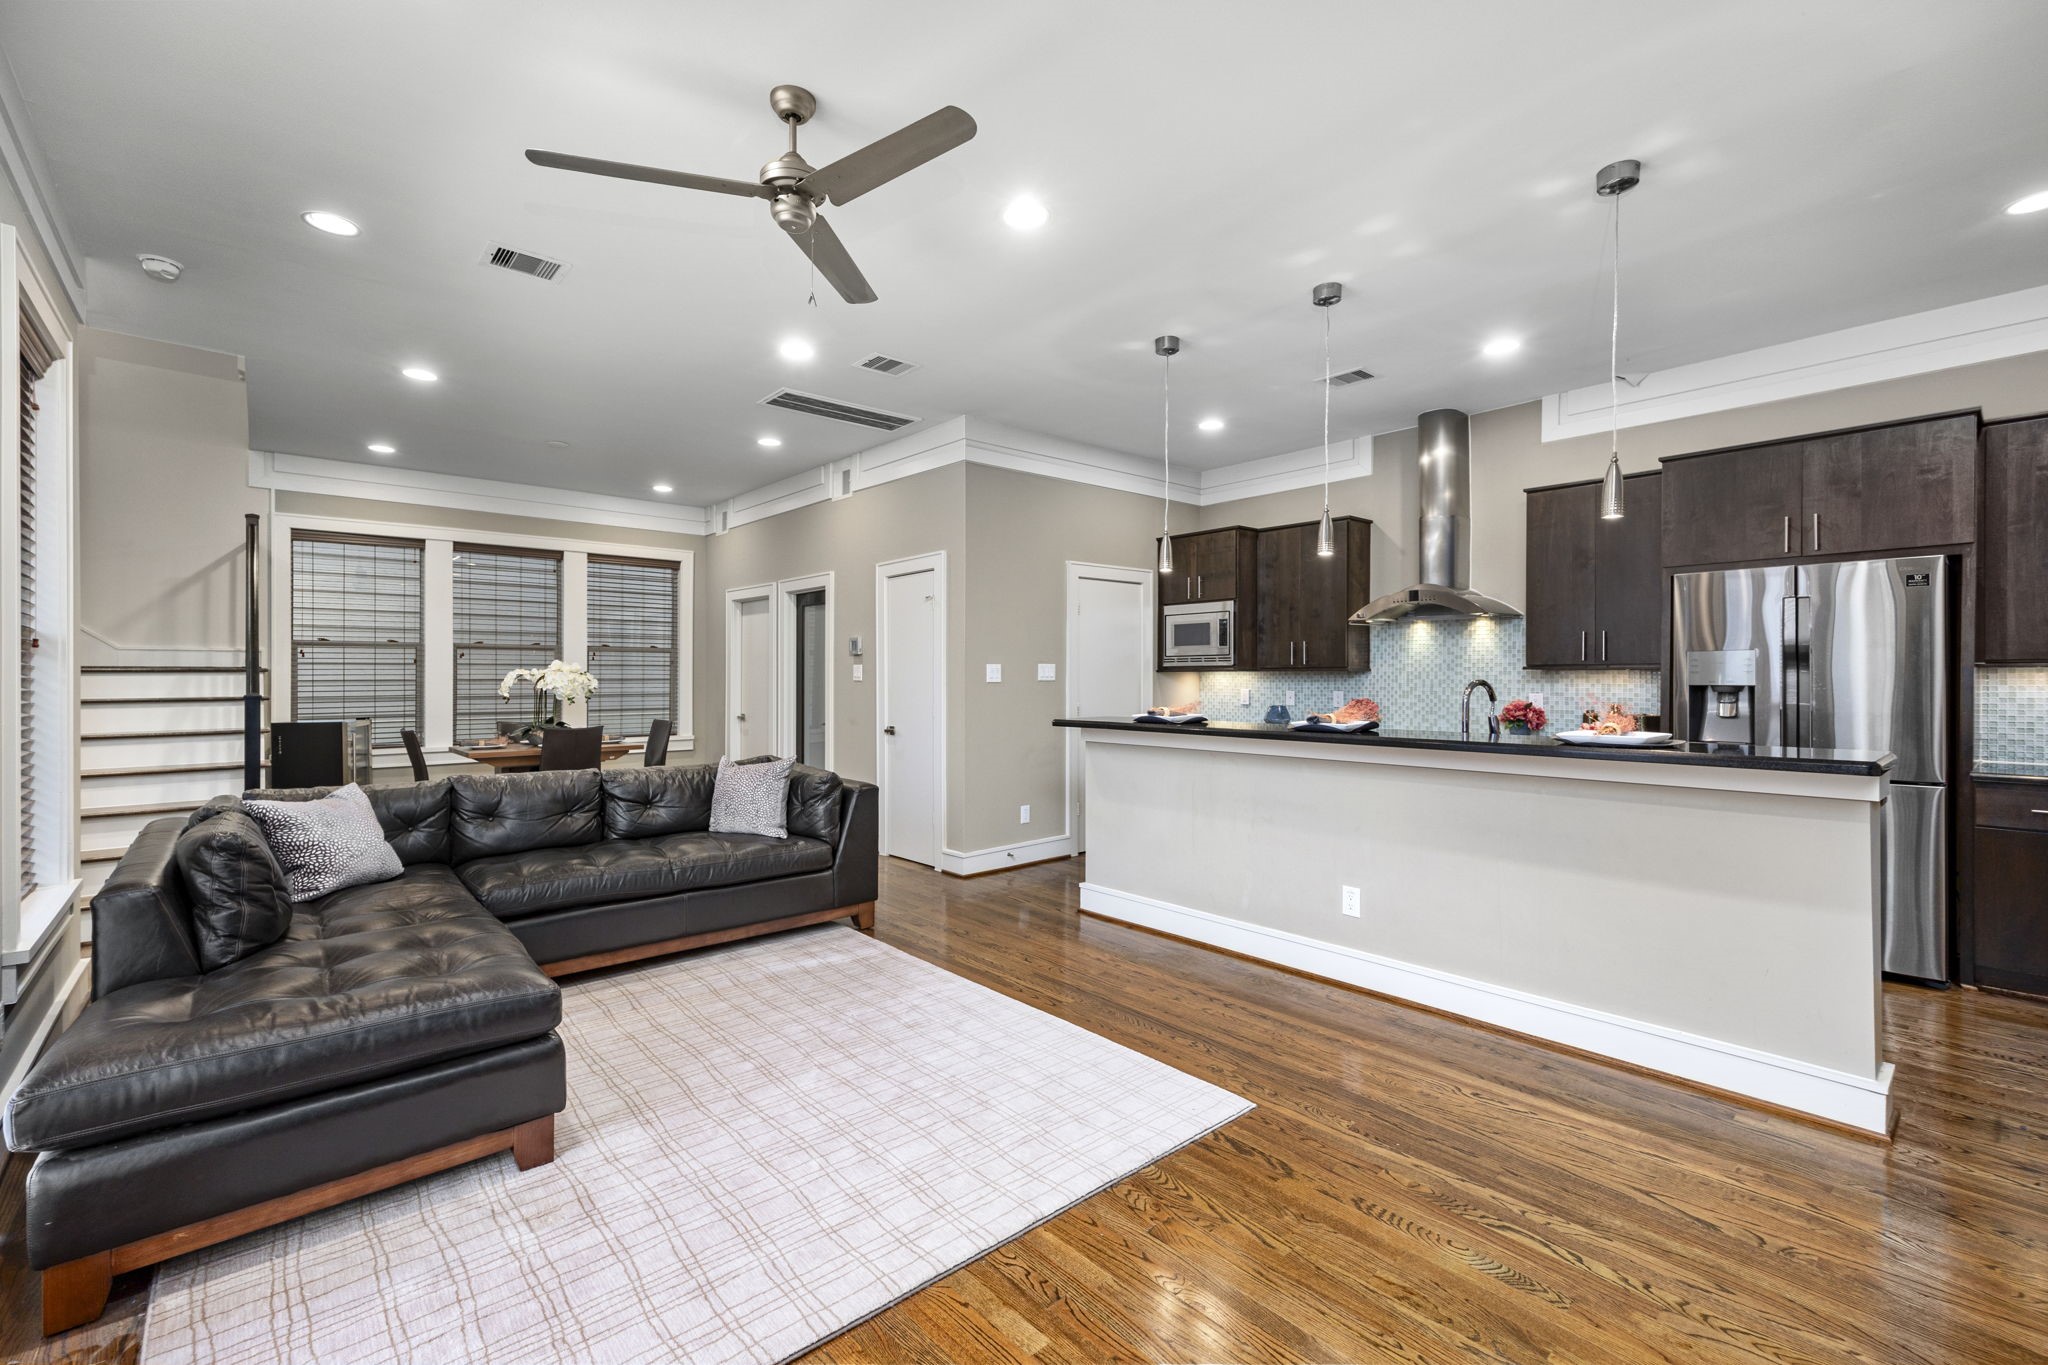 This Living Area opens to the breakfast bar and gourmet kitchen! 322 Patterson St., Houston, TX  77007